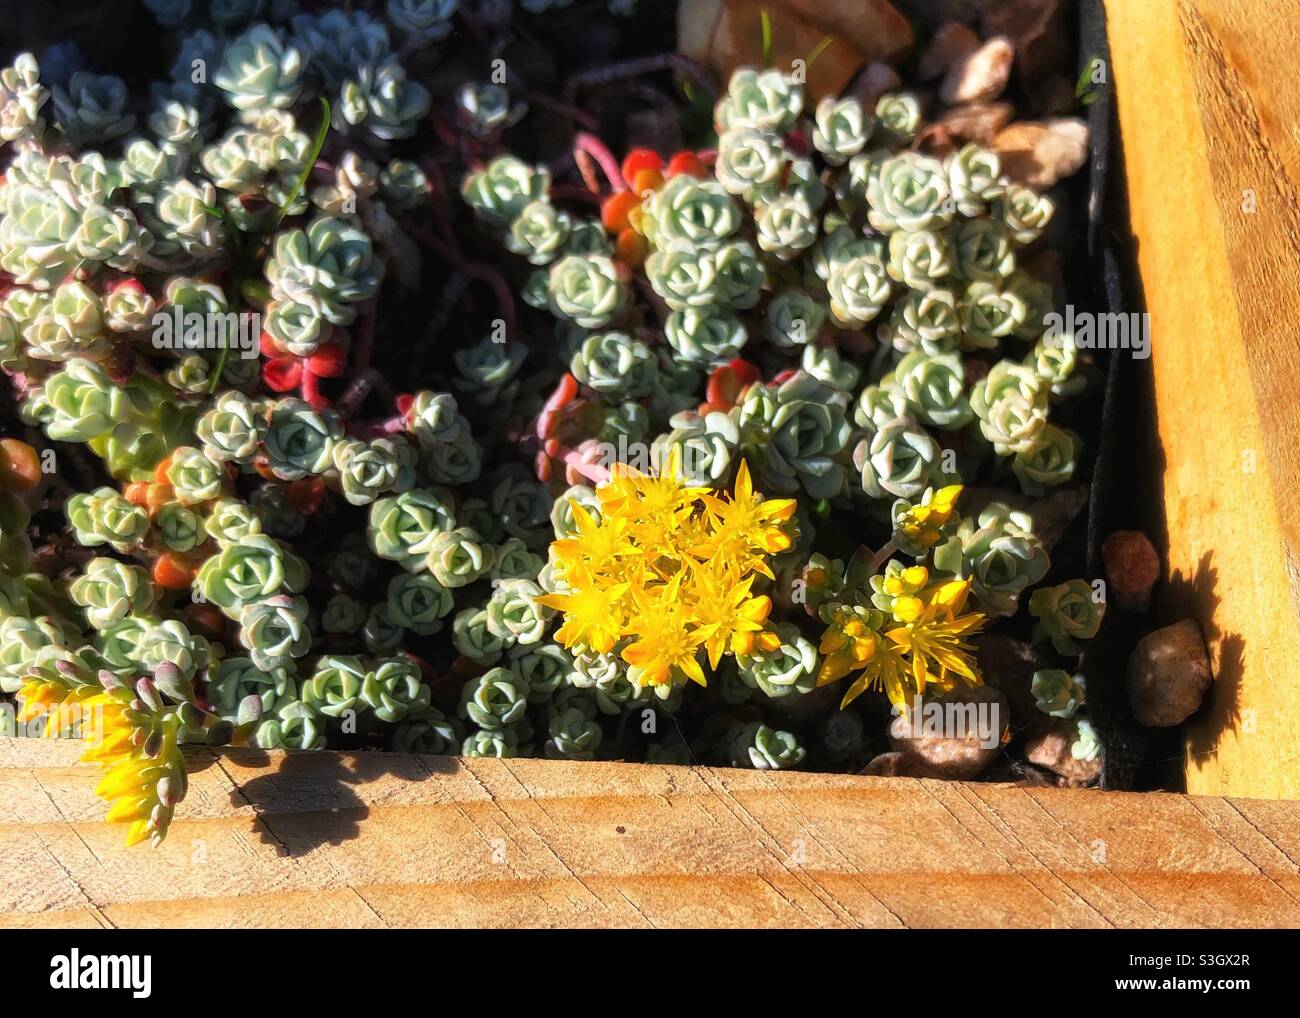 Alpine plants flowering in a wooden planter Stock Photo